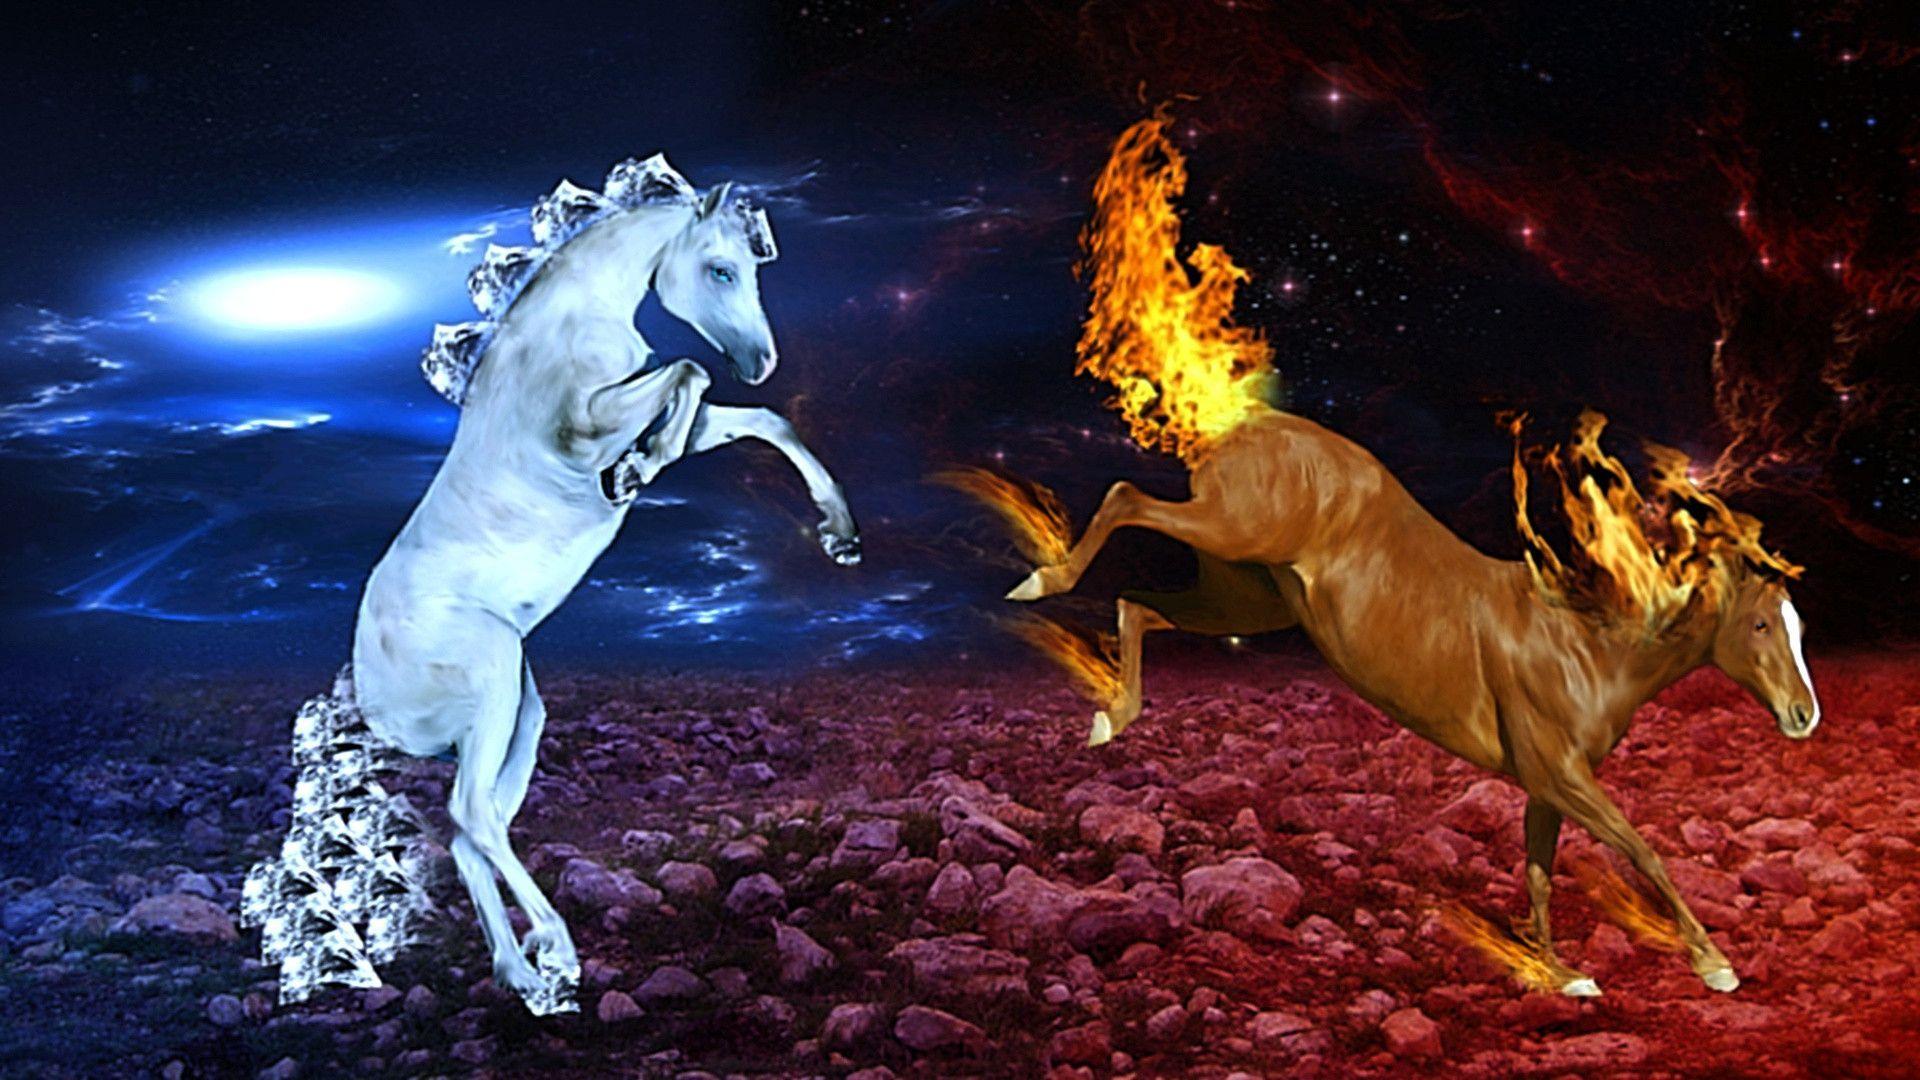 Cool Fire Animal Photo Wallpapers HD Resolution